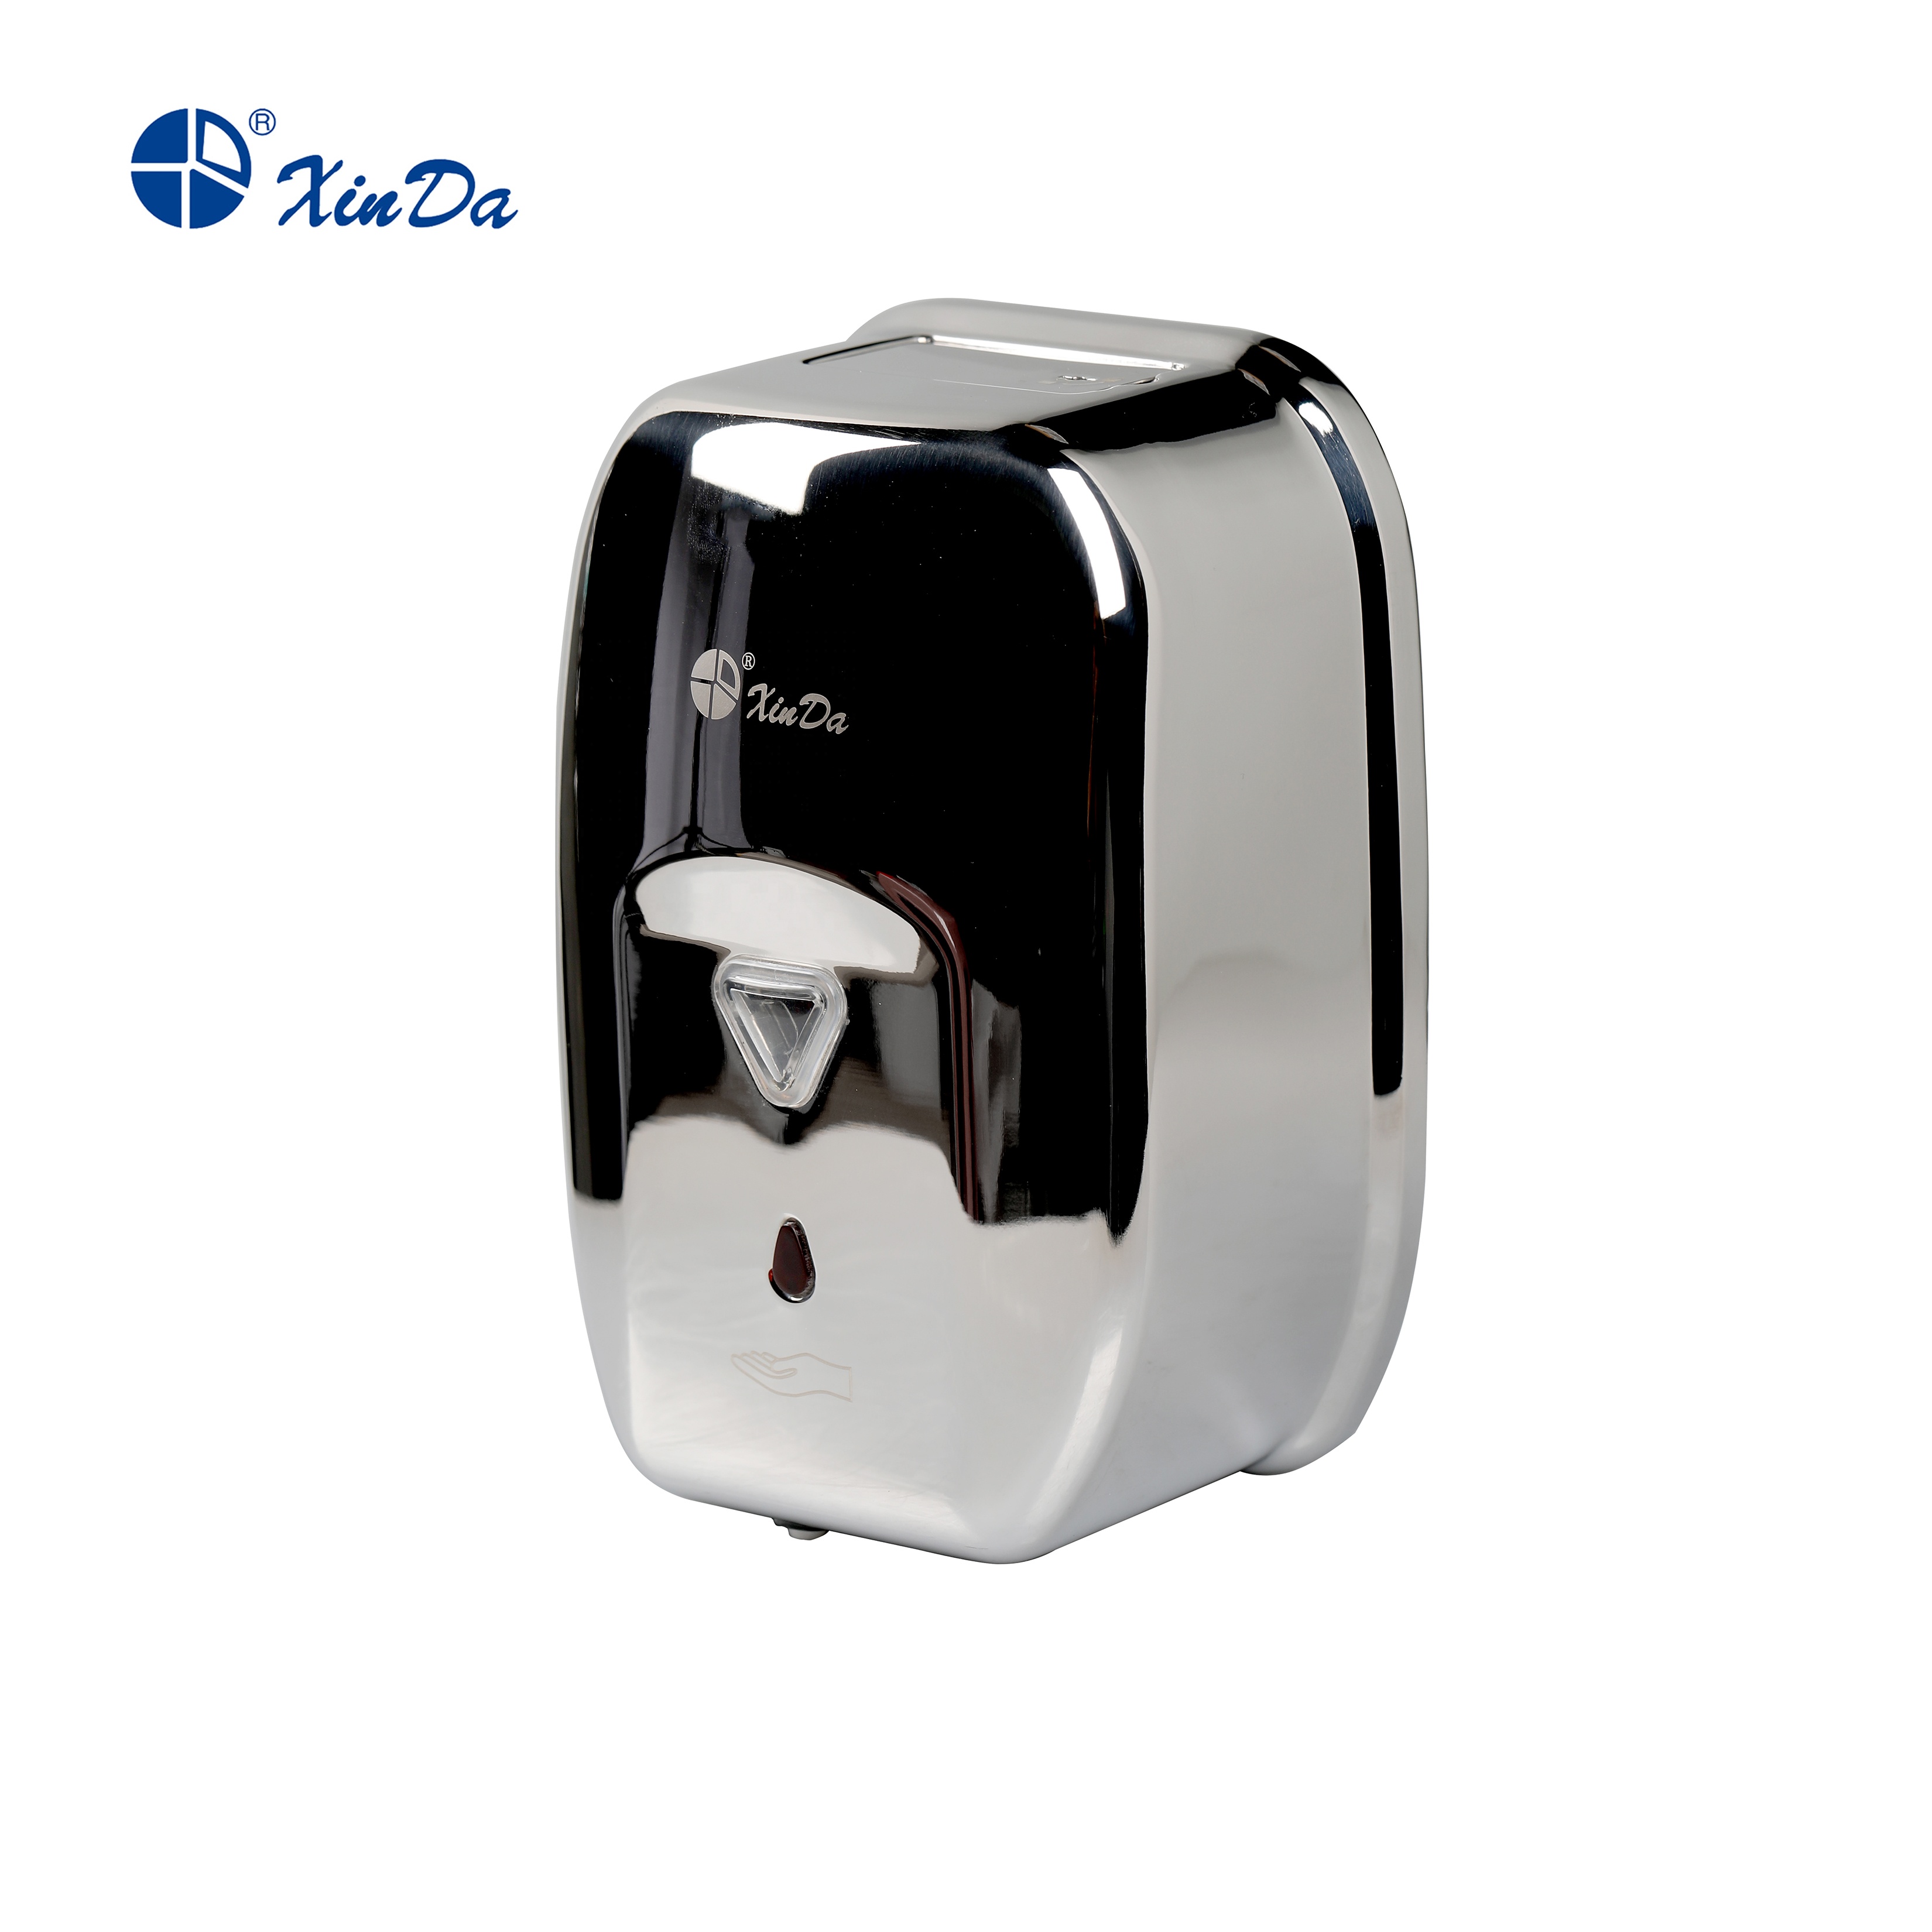 Soap Dispenser ZYQ 120 Metal Automatic Soap Dispenser Sanitize Wall Mounted with Key-Locked Protection Soap Dispenser